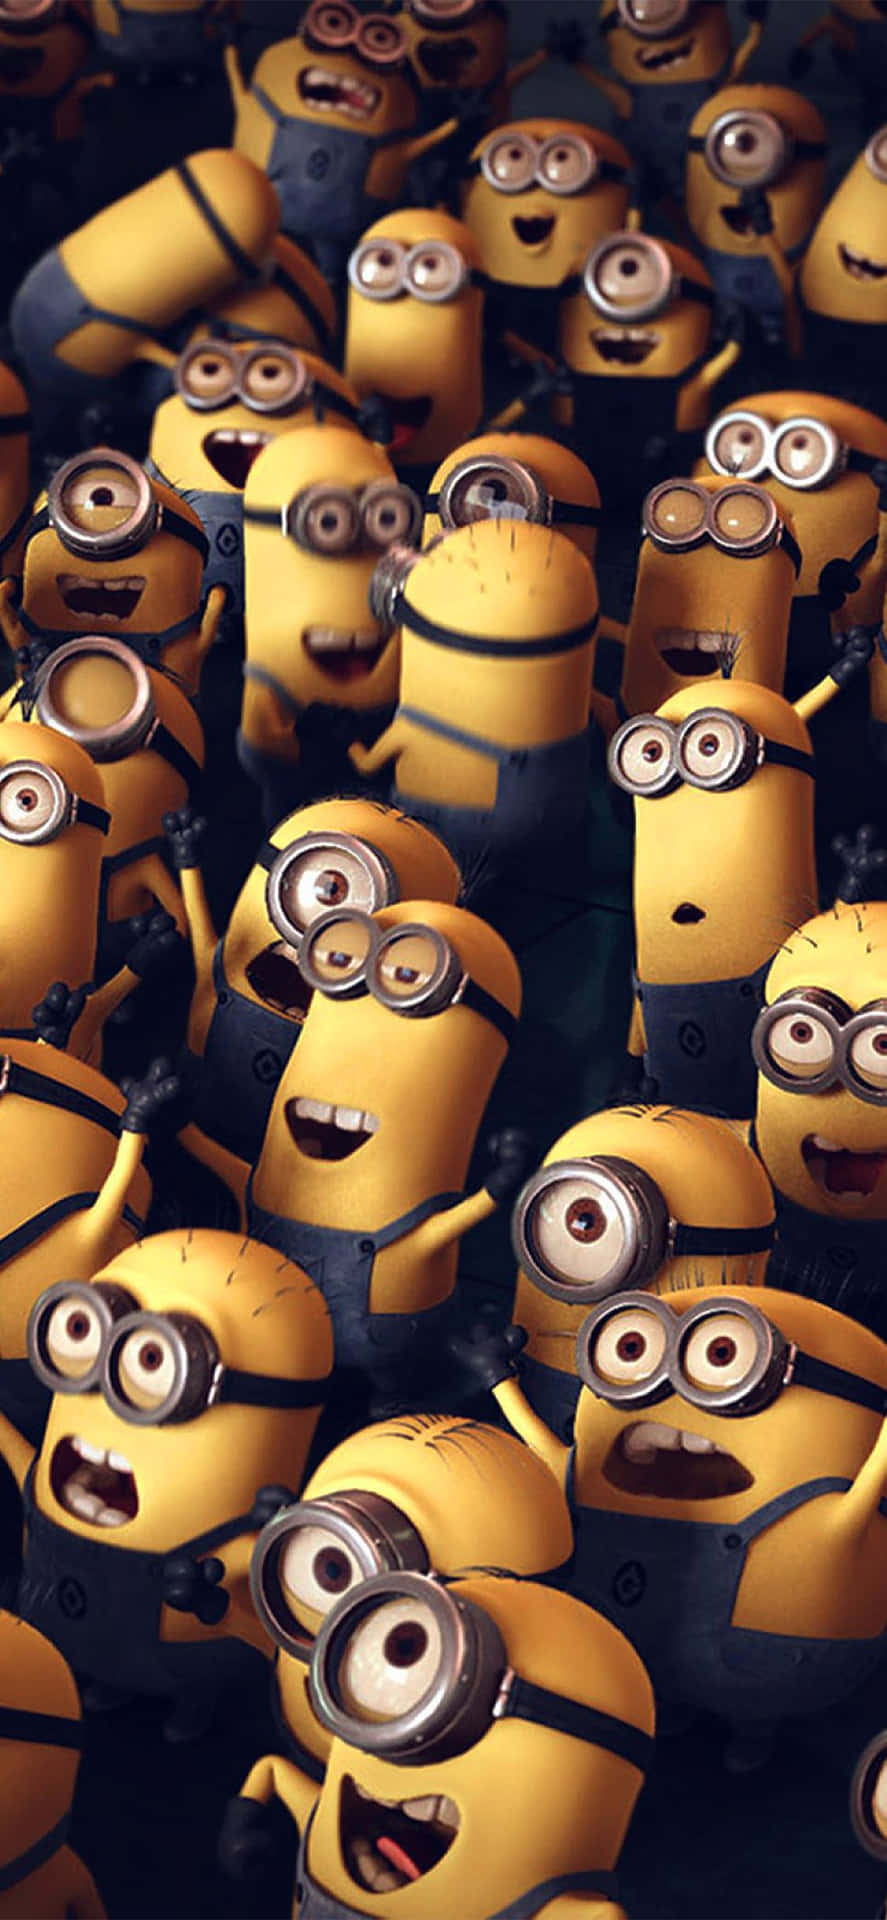 Laughing Despicable Me Minion Iphone Wallpaper